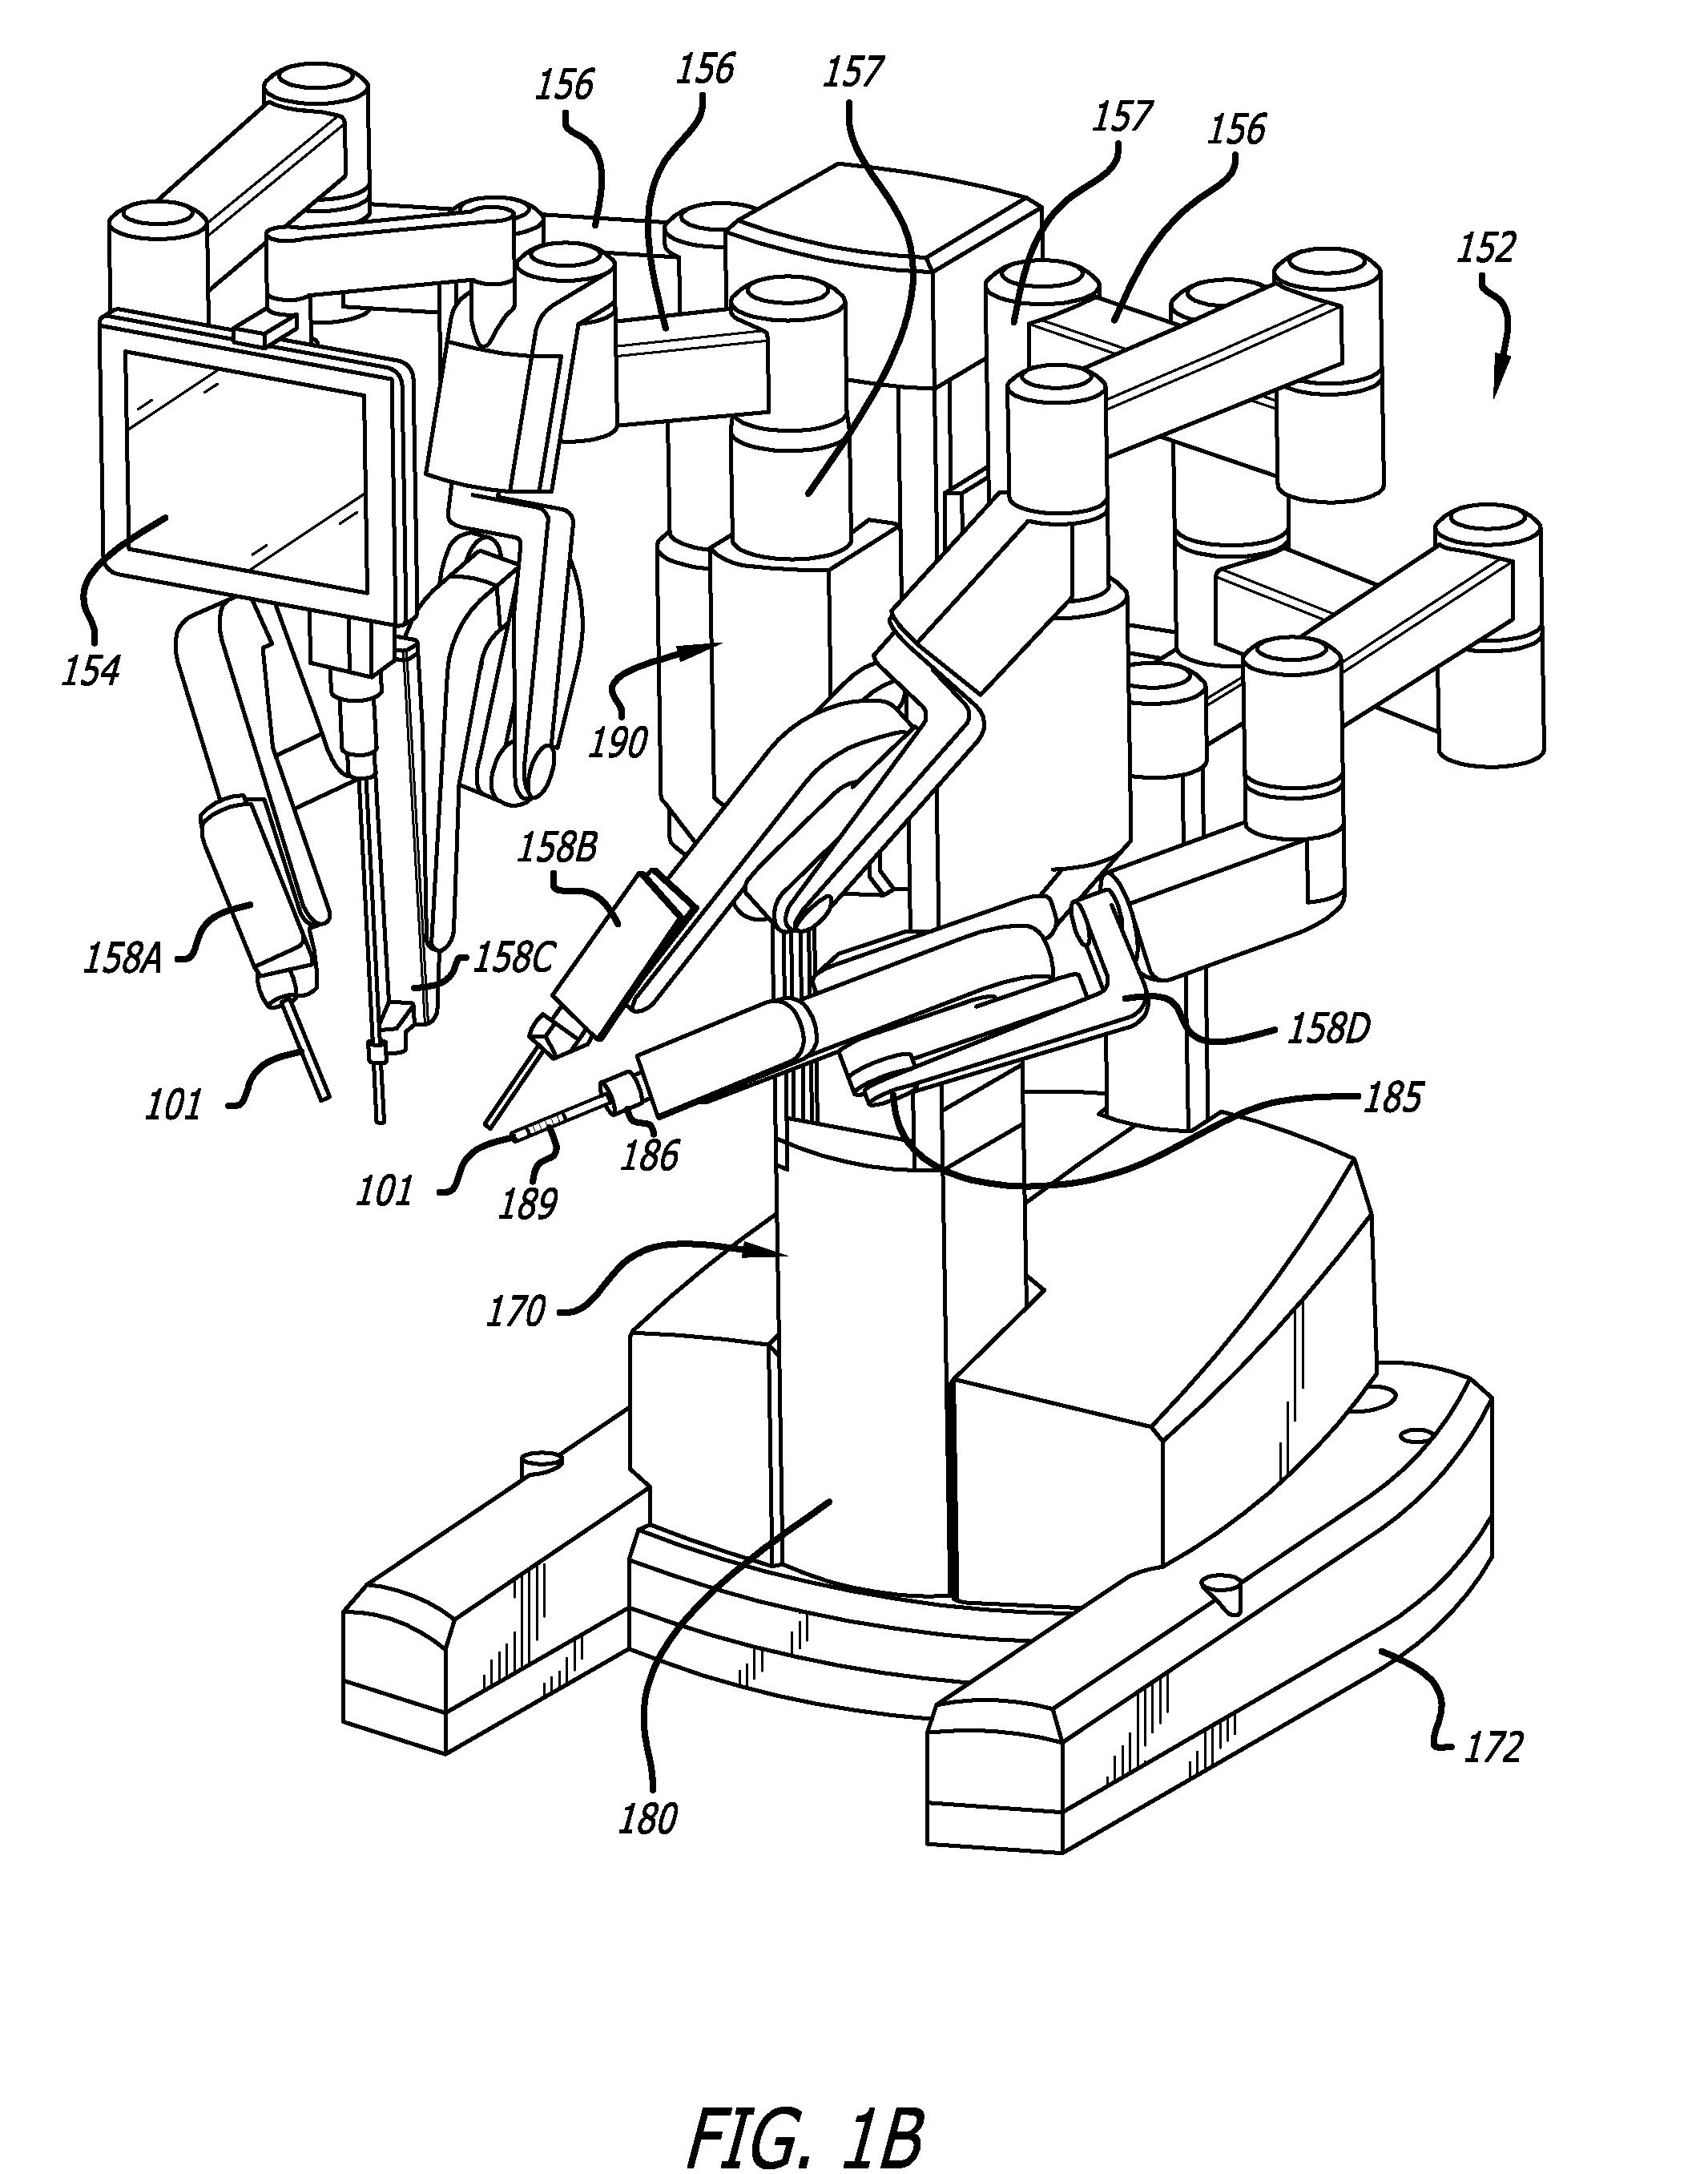 Tool tracking systems and methods for image guided surgery